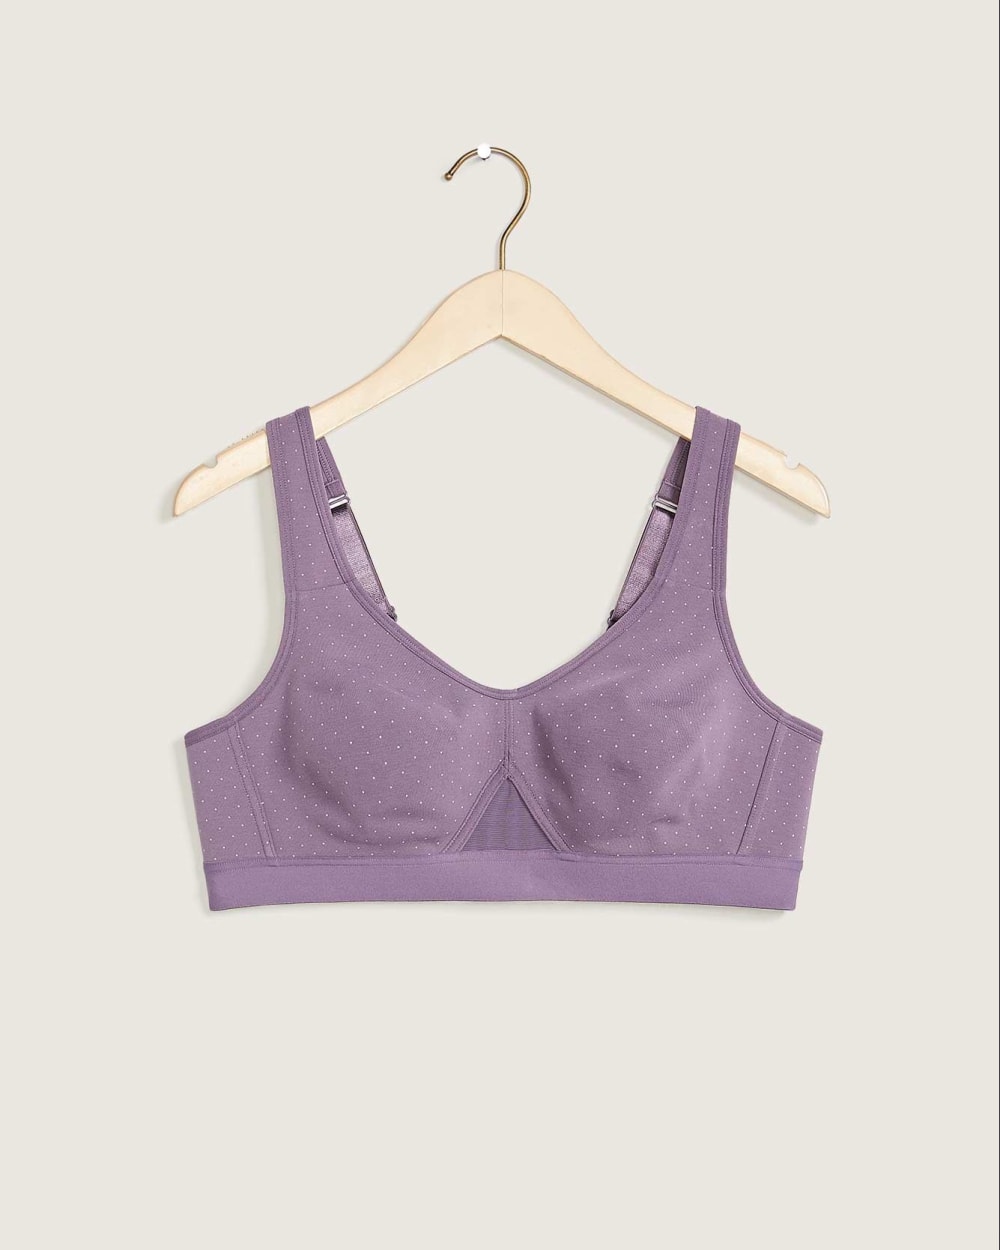 Cotton Sports Bras for Women TIANEK High Impact Front Closure Wirefree  Stappy Convertible Knix Bras for Women Wireless,Purple